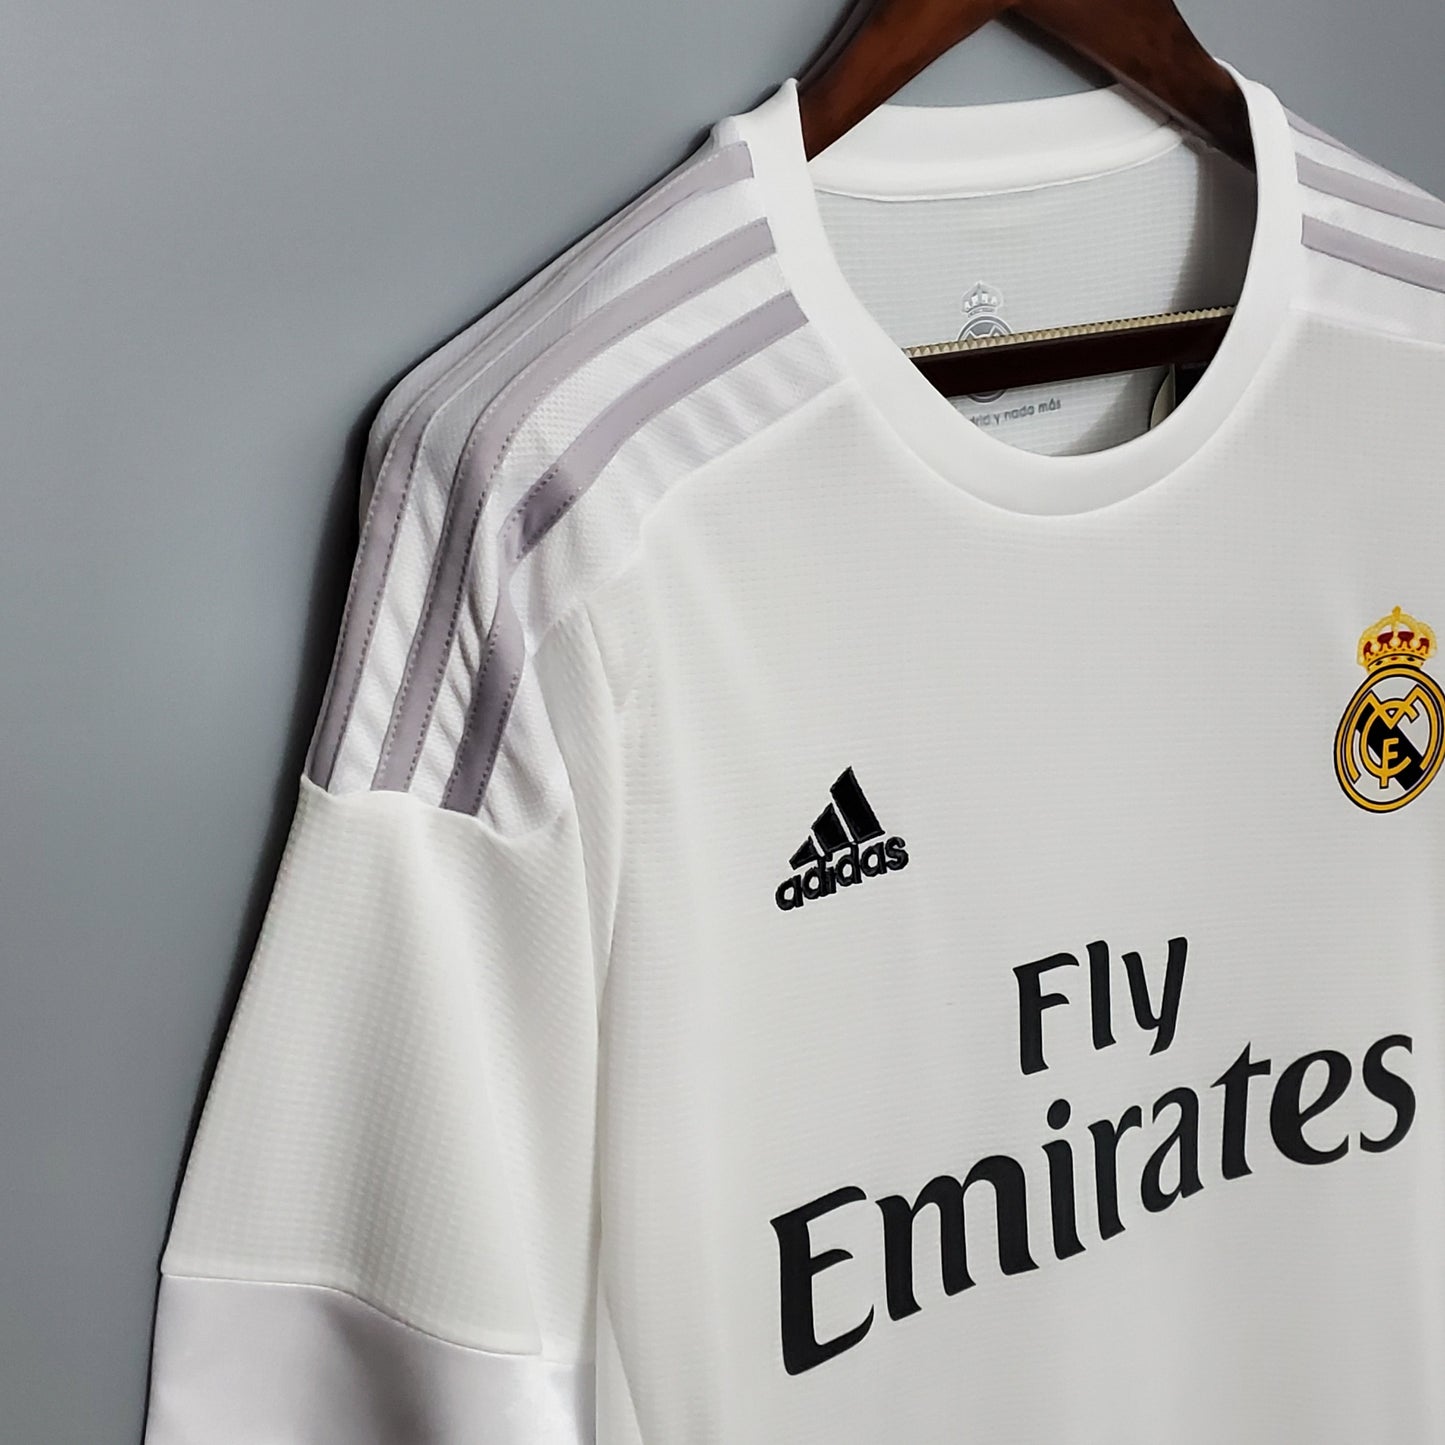 Real Madrid 2015/16 Home Jersey